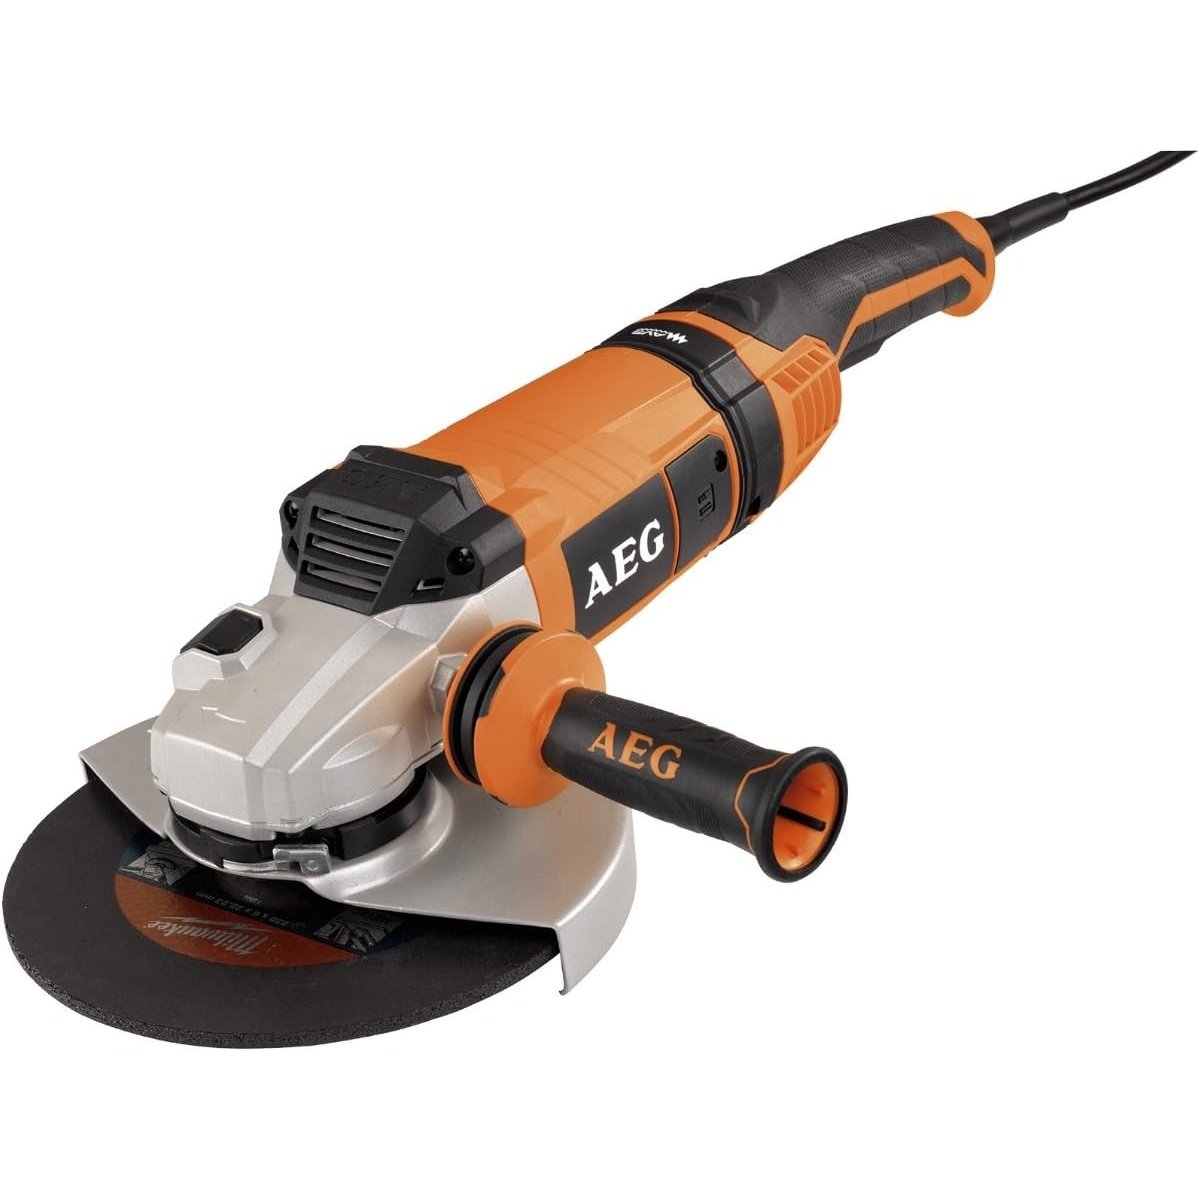 AEG 9"/230mm Angle Grinder 2100W - WS21-230 | Supply Master Accra, Ghana Grinder Buy Tools hardware Building materials